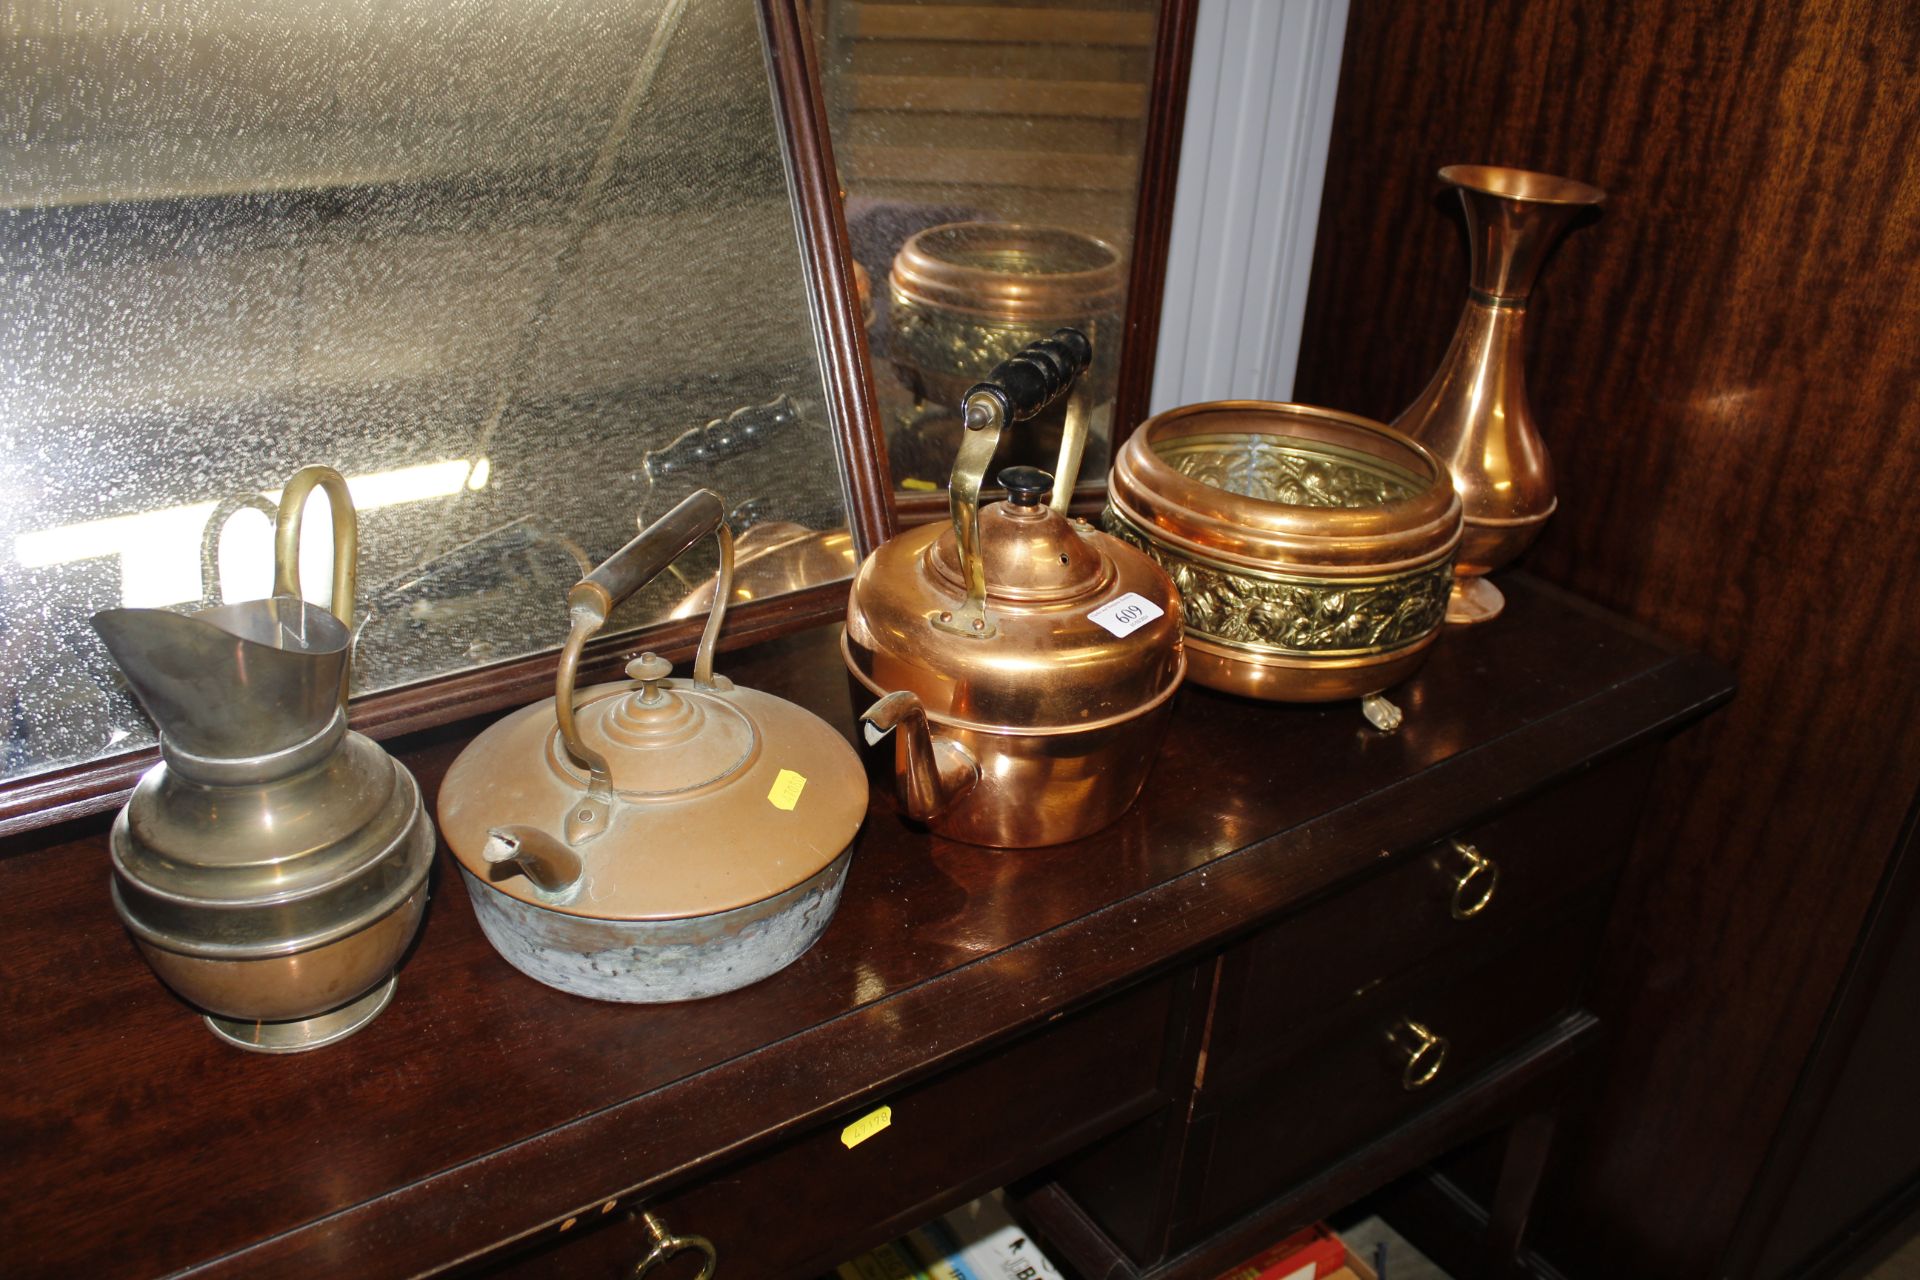 A collection of metal ware including copper kettle